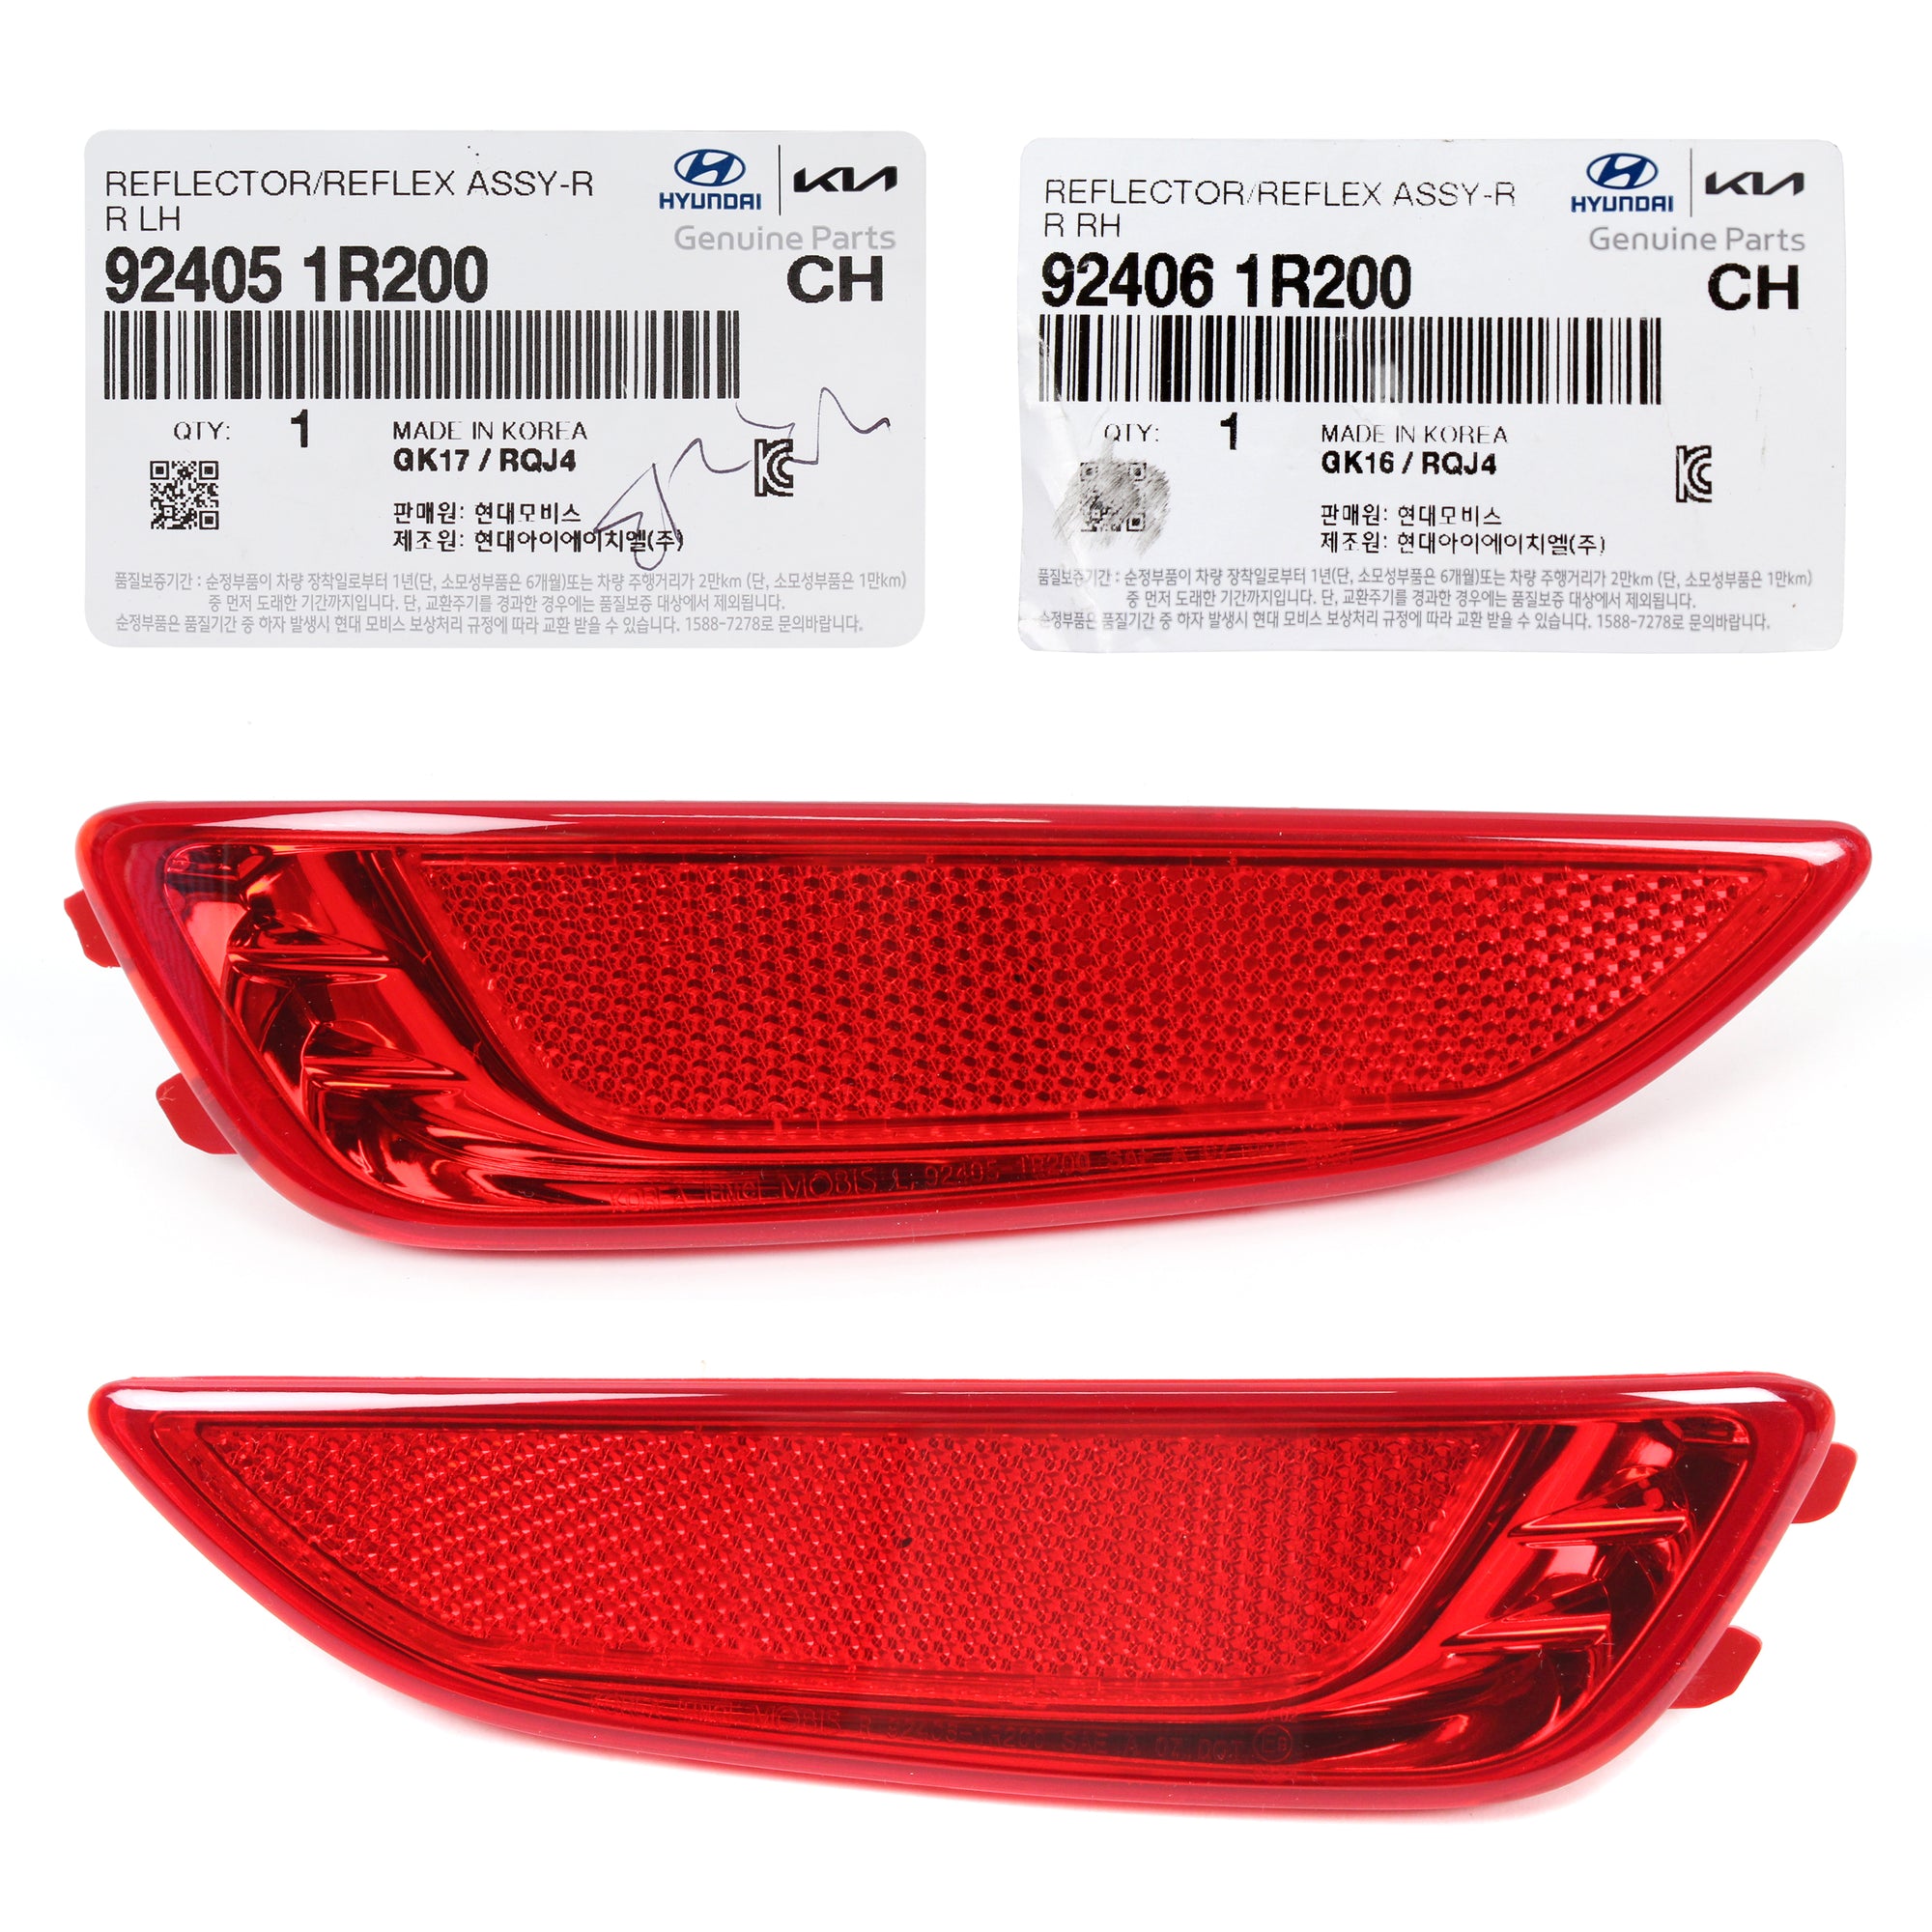 GENUINE Rear Bumper Reflector LEFT & RIGHT for 12-17 Hyundai Accent Hatchback